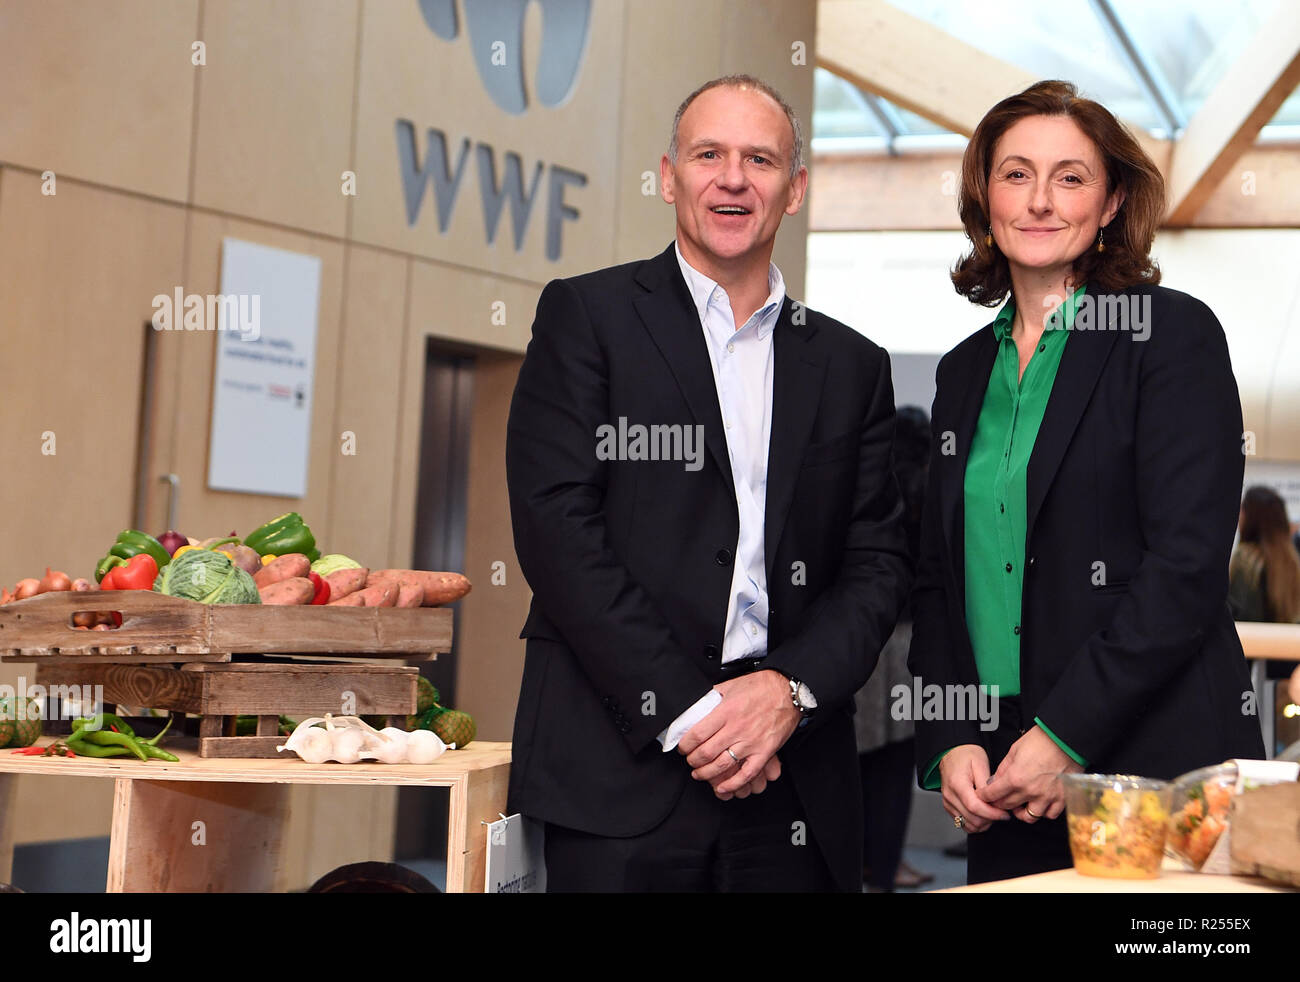 Woking, United Kingdom. 16th Nov 2018. Tesco and WWF new partnership. Dave Lewis, Tesco Group CEO and Tanya Steele, WWF UK CEO at the WWF UK HQ in Woking. Tesco and WWF today announced a ground-breaking, long-term partnership with the aim of reducing the environmental impact of the average UK shopping basket by 50%, improving the sustainability of food while ensuring it remains affordable for all..Picture by Andrew Parsons / Parsons Media Credit: andrew parsons/Alamy Live News Stock Photo